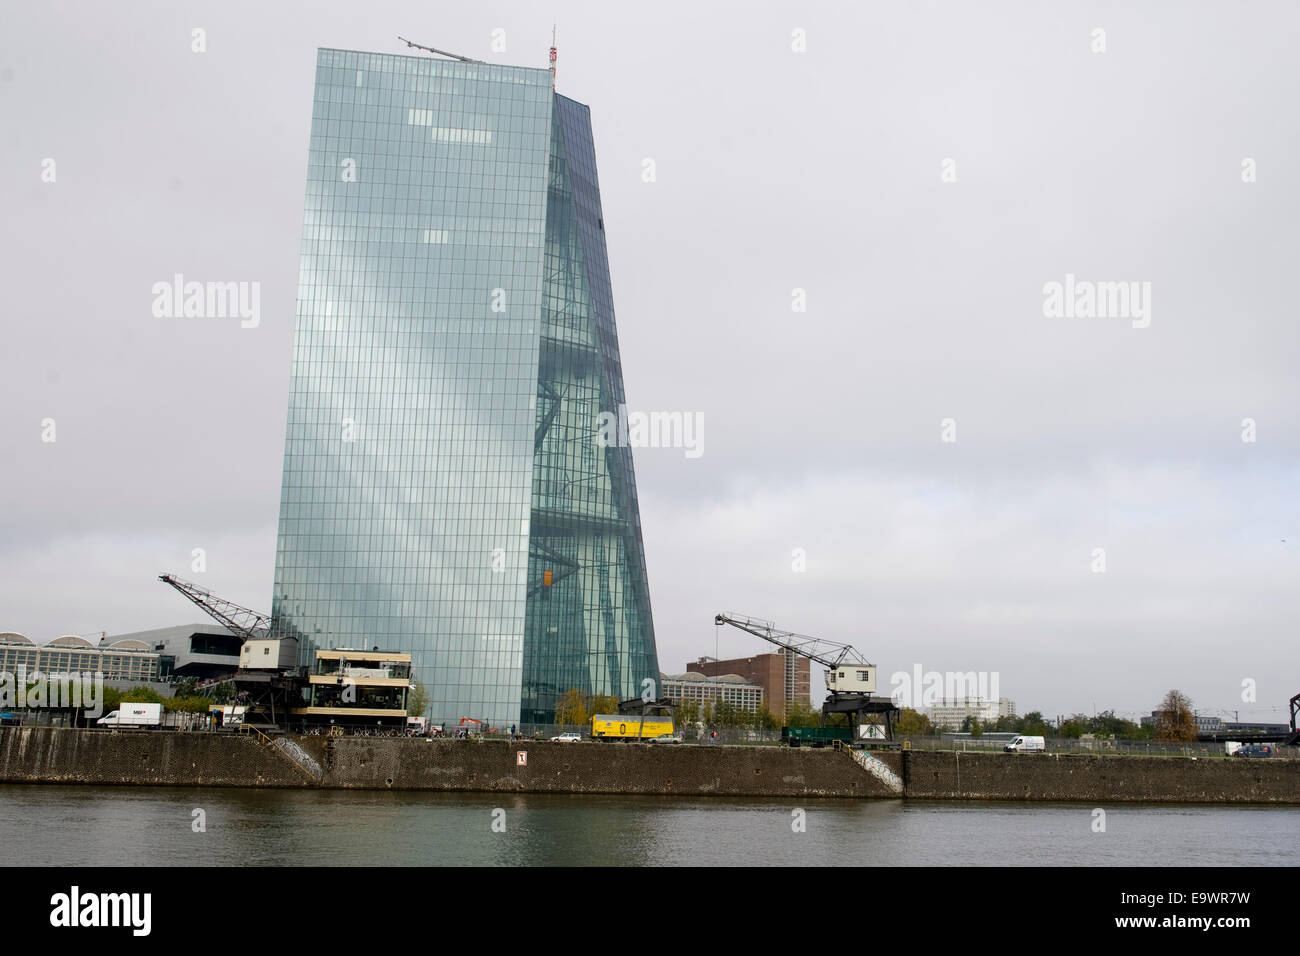 Picture of the new European Central Bank (EZB, ECB) in Frankfurt, taken on 27th October 2014 Stock Photo